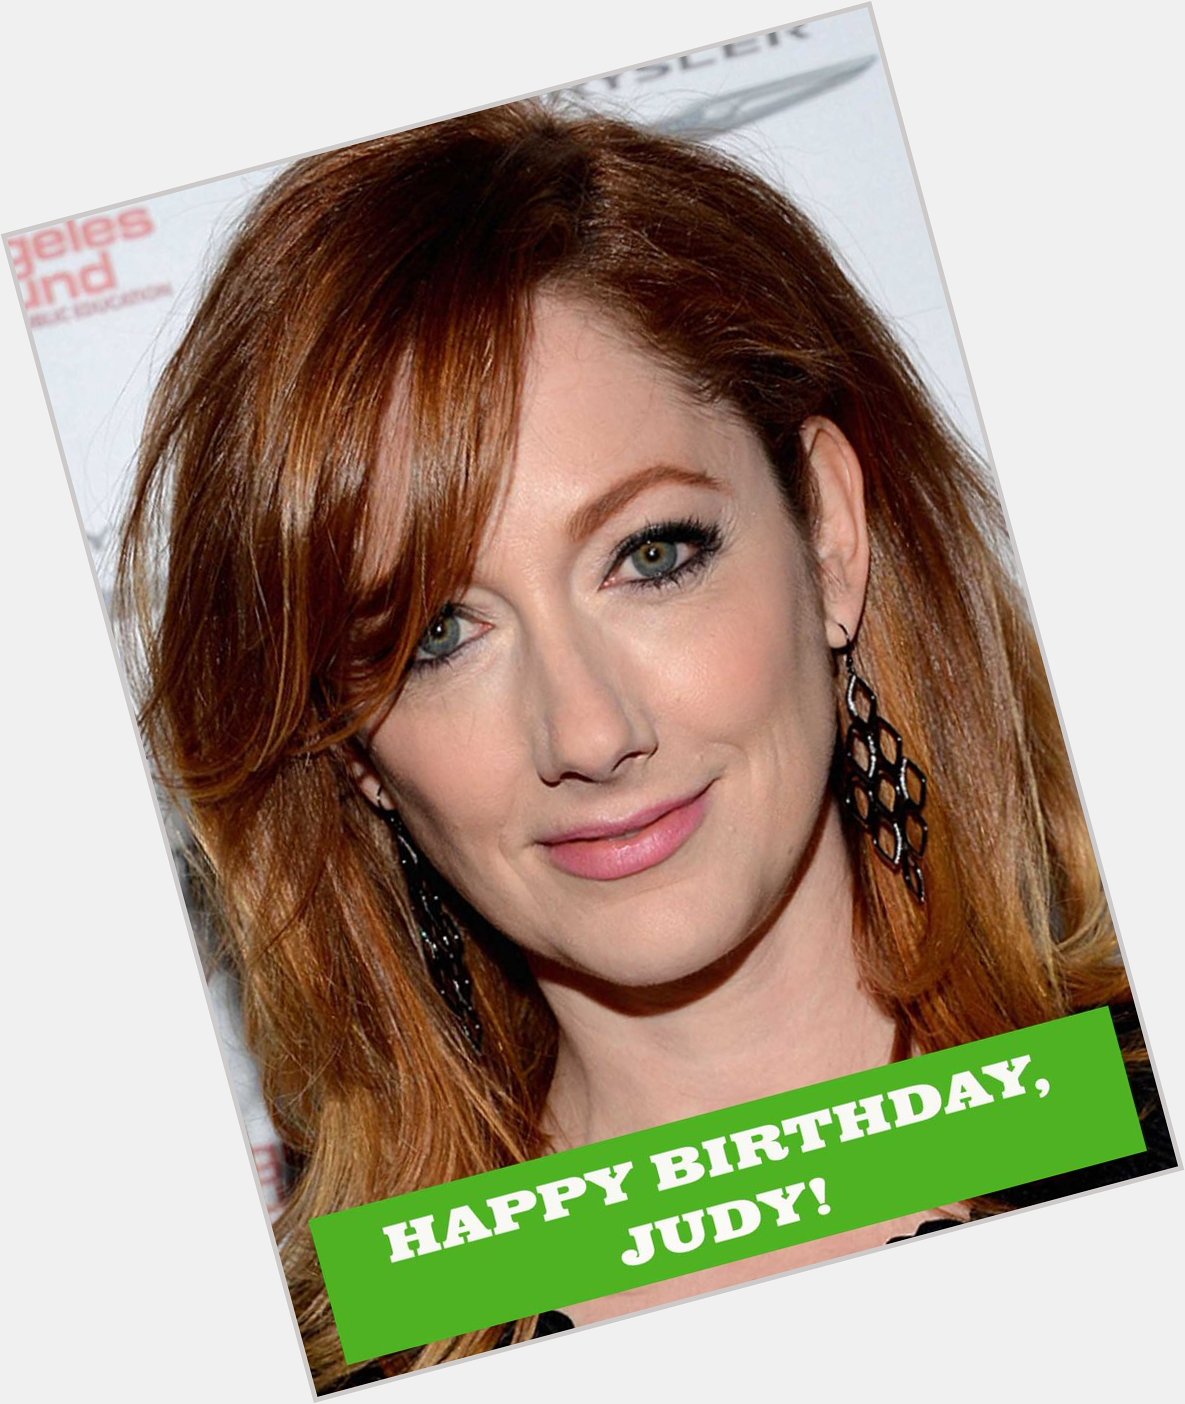 Happy Birthday to Judy Greer! A very talented actress who has played some great characters throughout the years. 